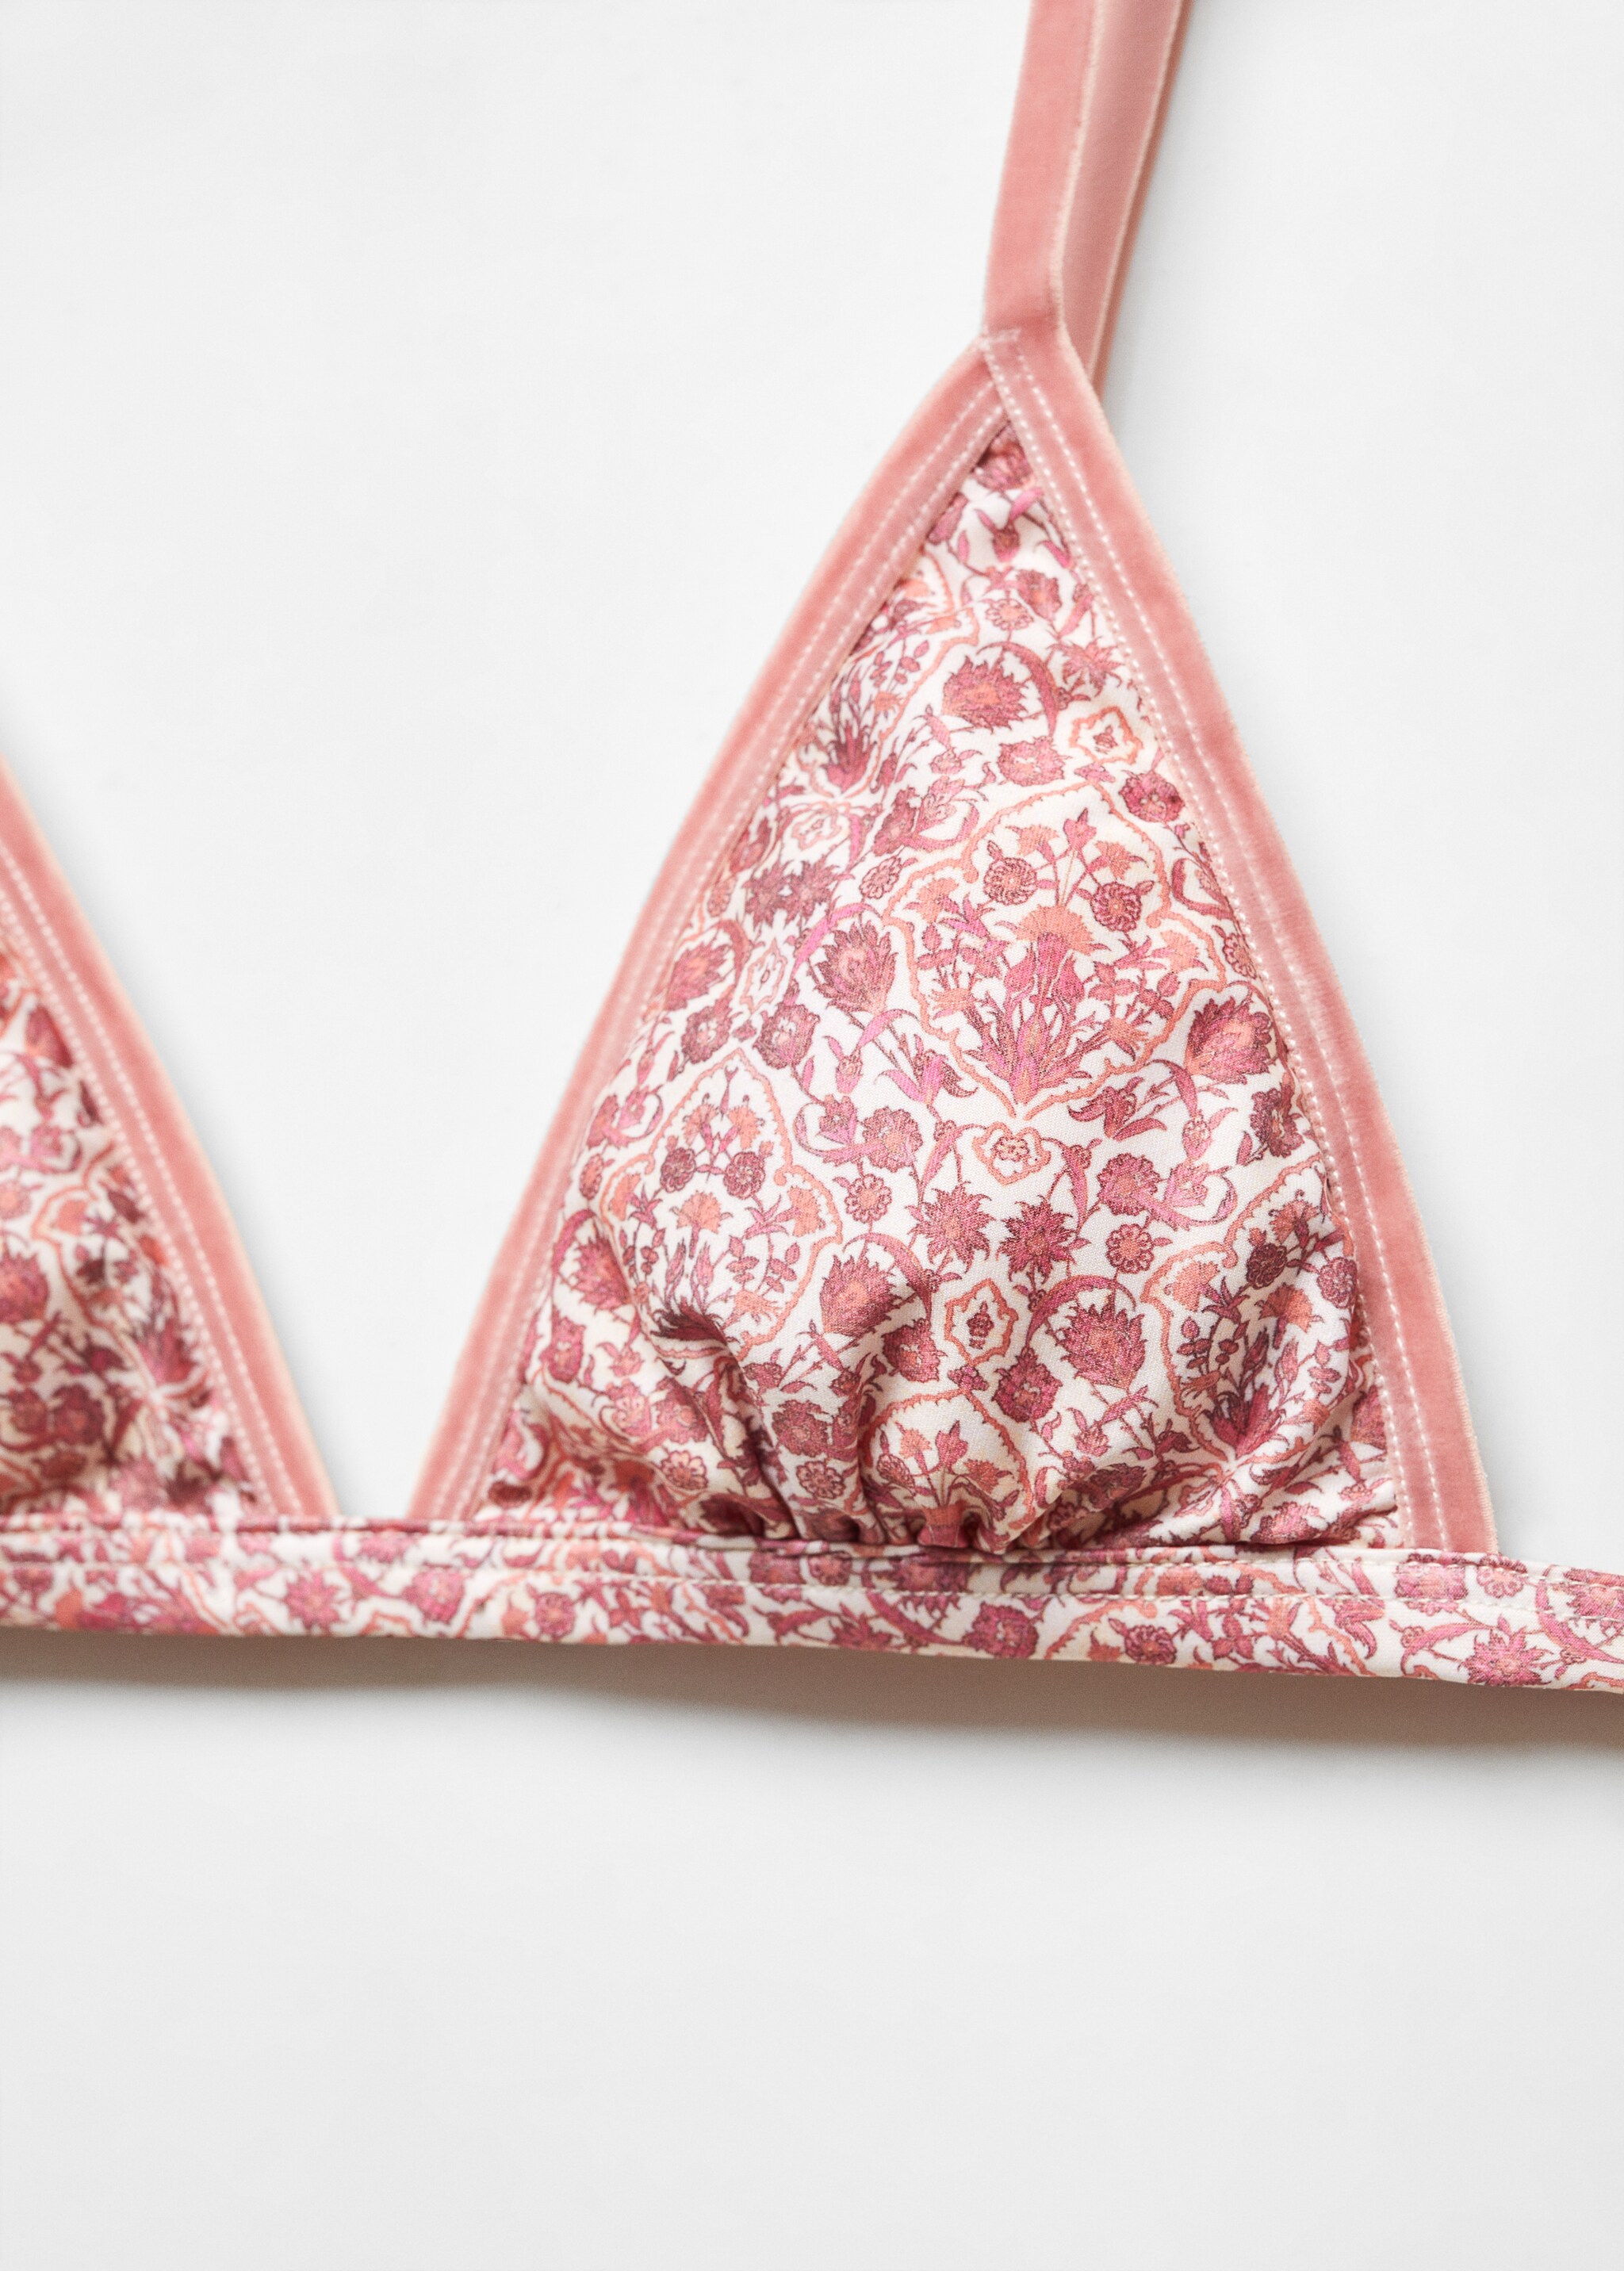 Printed triangle bra - Details of the article 8